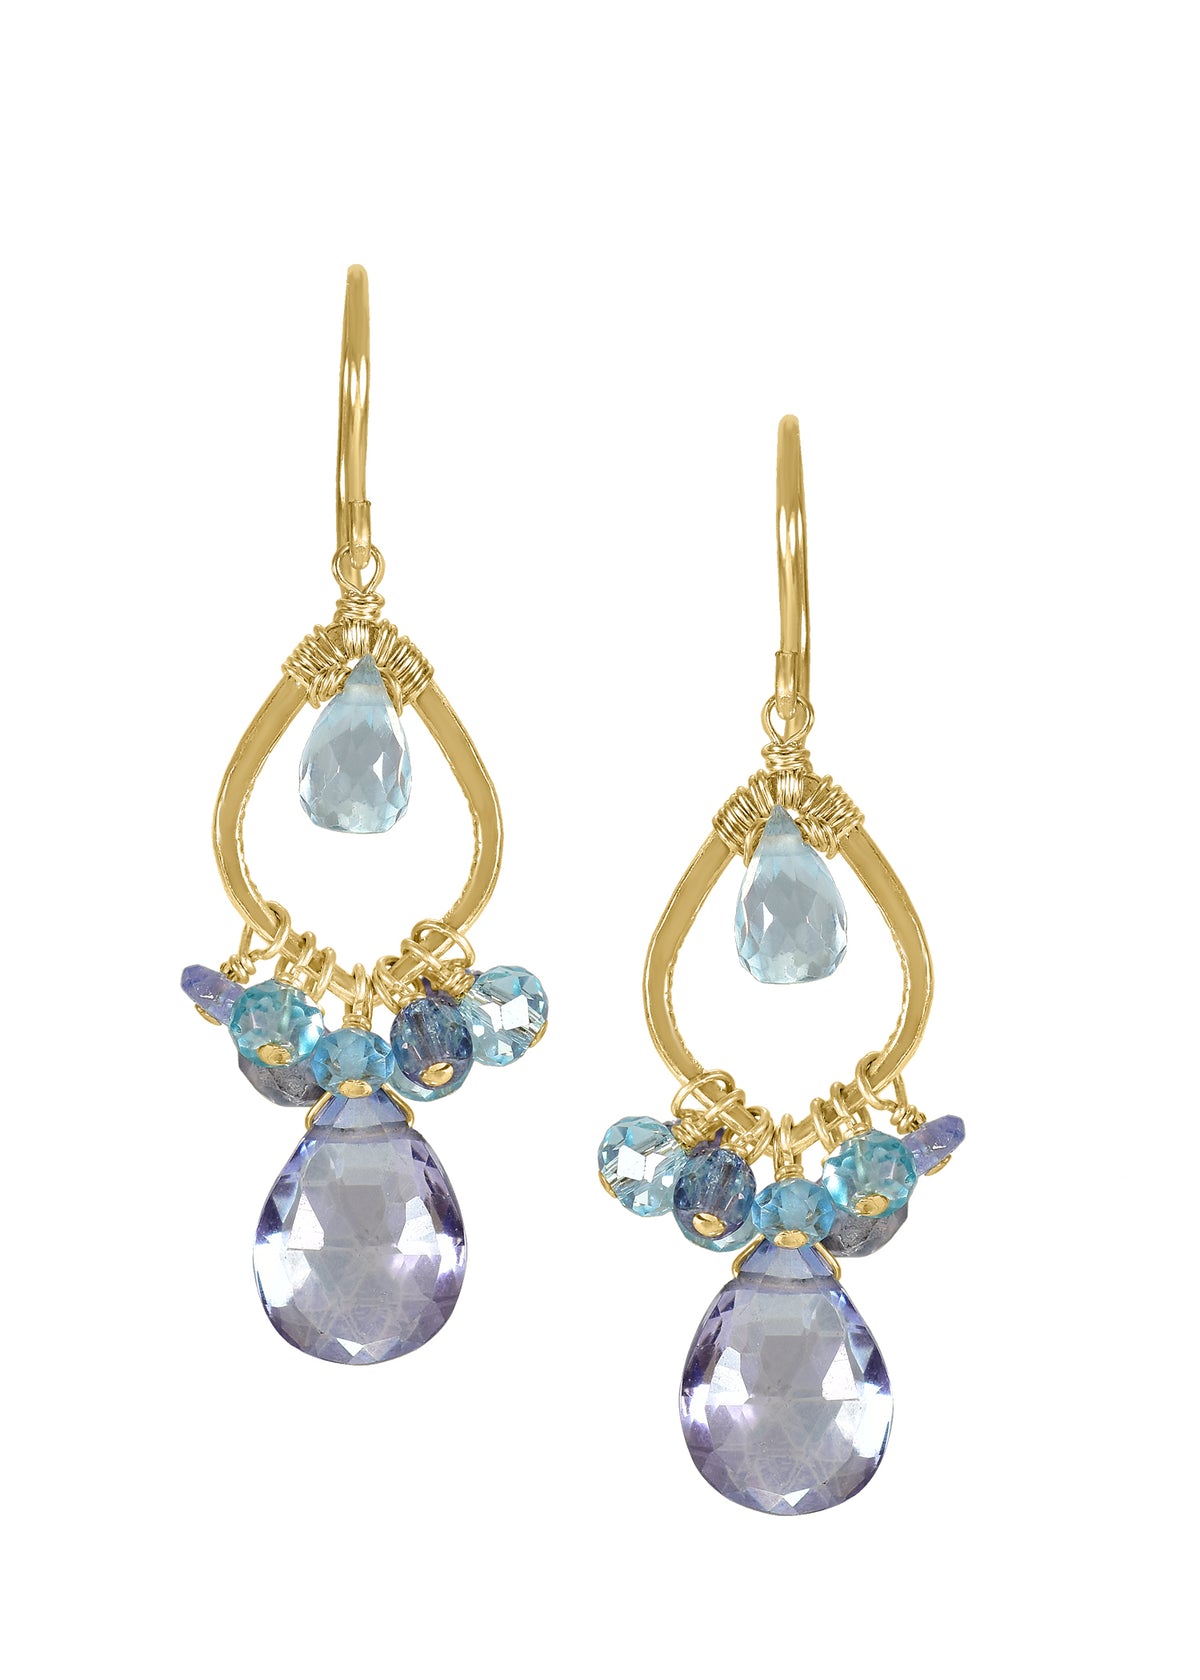 Aquamarine Blue quartz Blue sapphire 14k gold fill Crystal Earrings measure 1-1/2&quot; in length (including the ear wires) and 7/16&quot; in width at the widest point Handmade in our Los Angeles studio